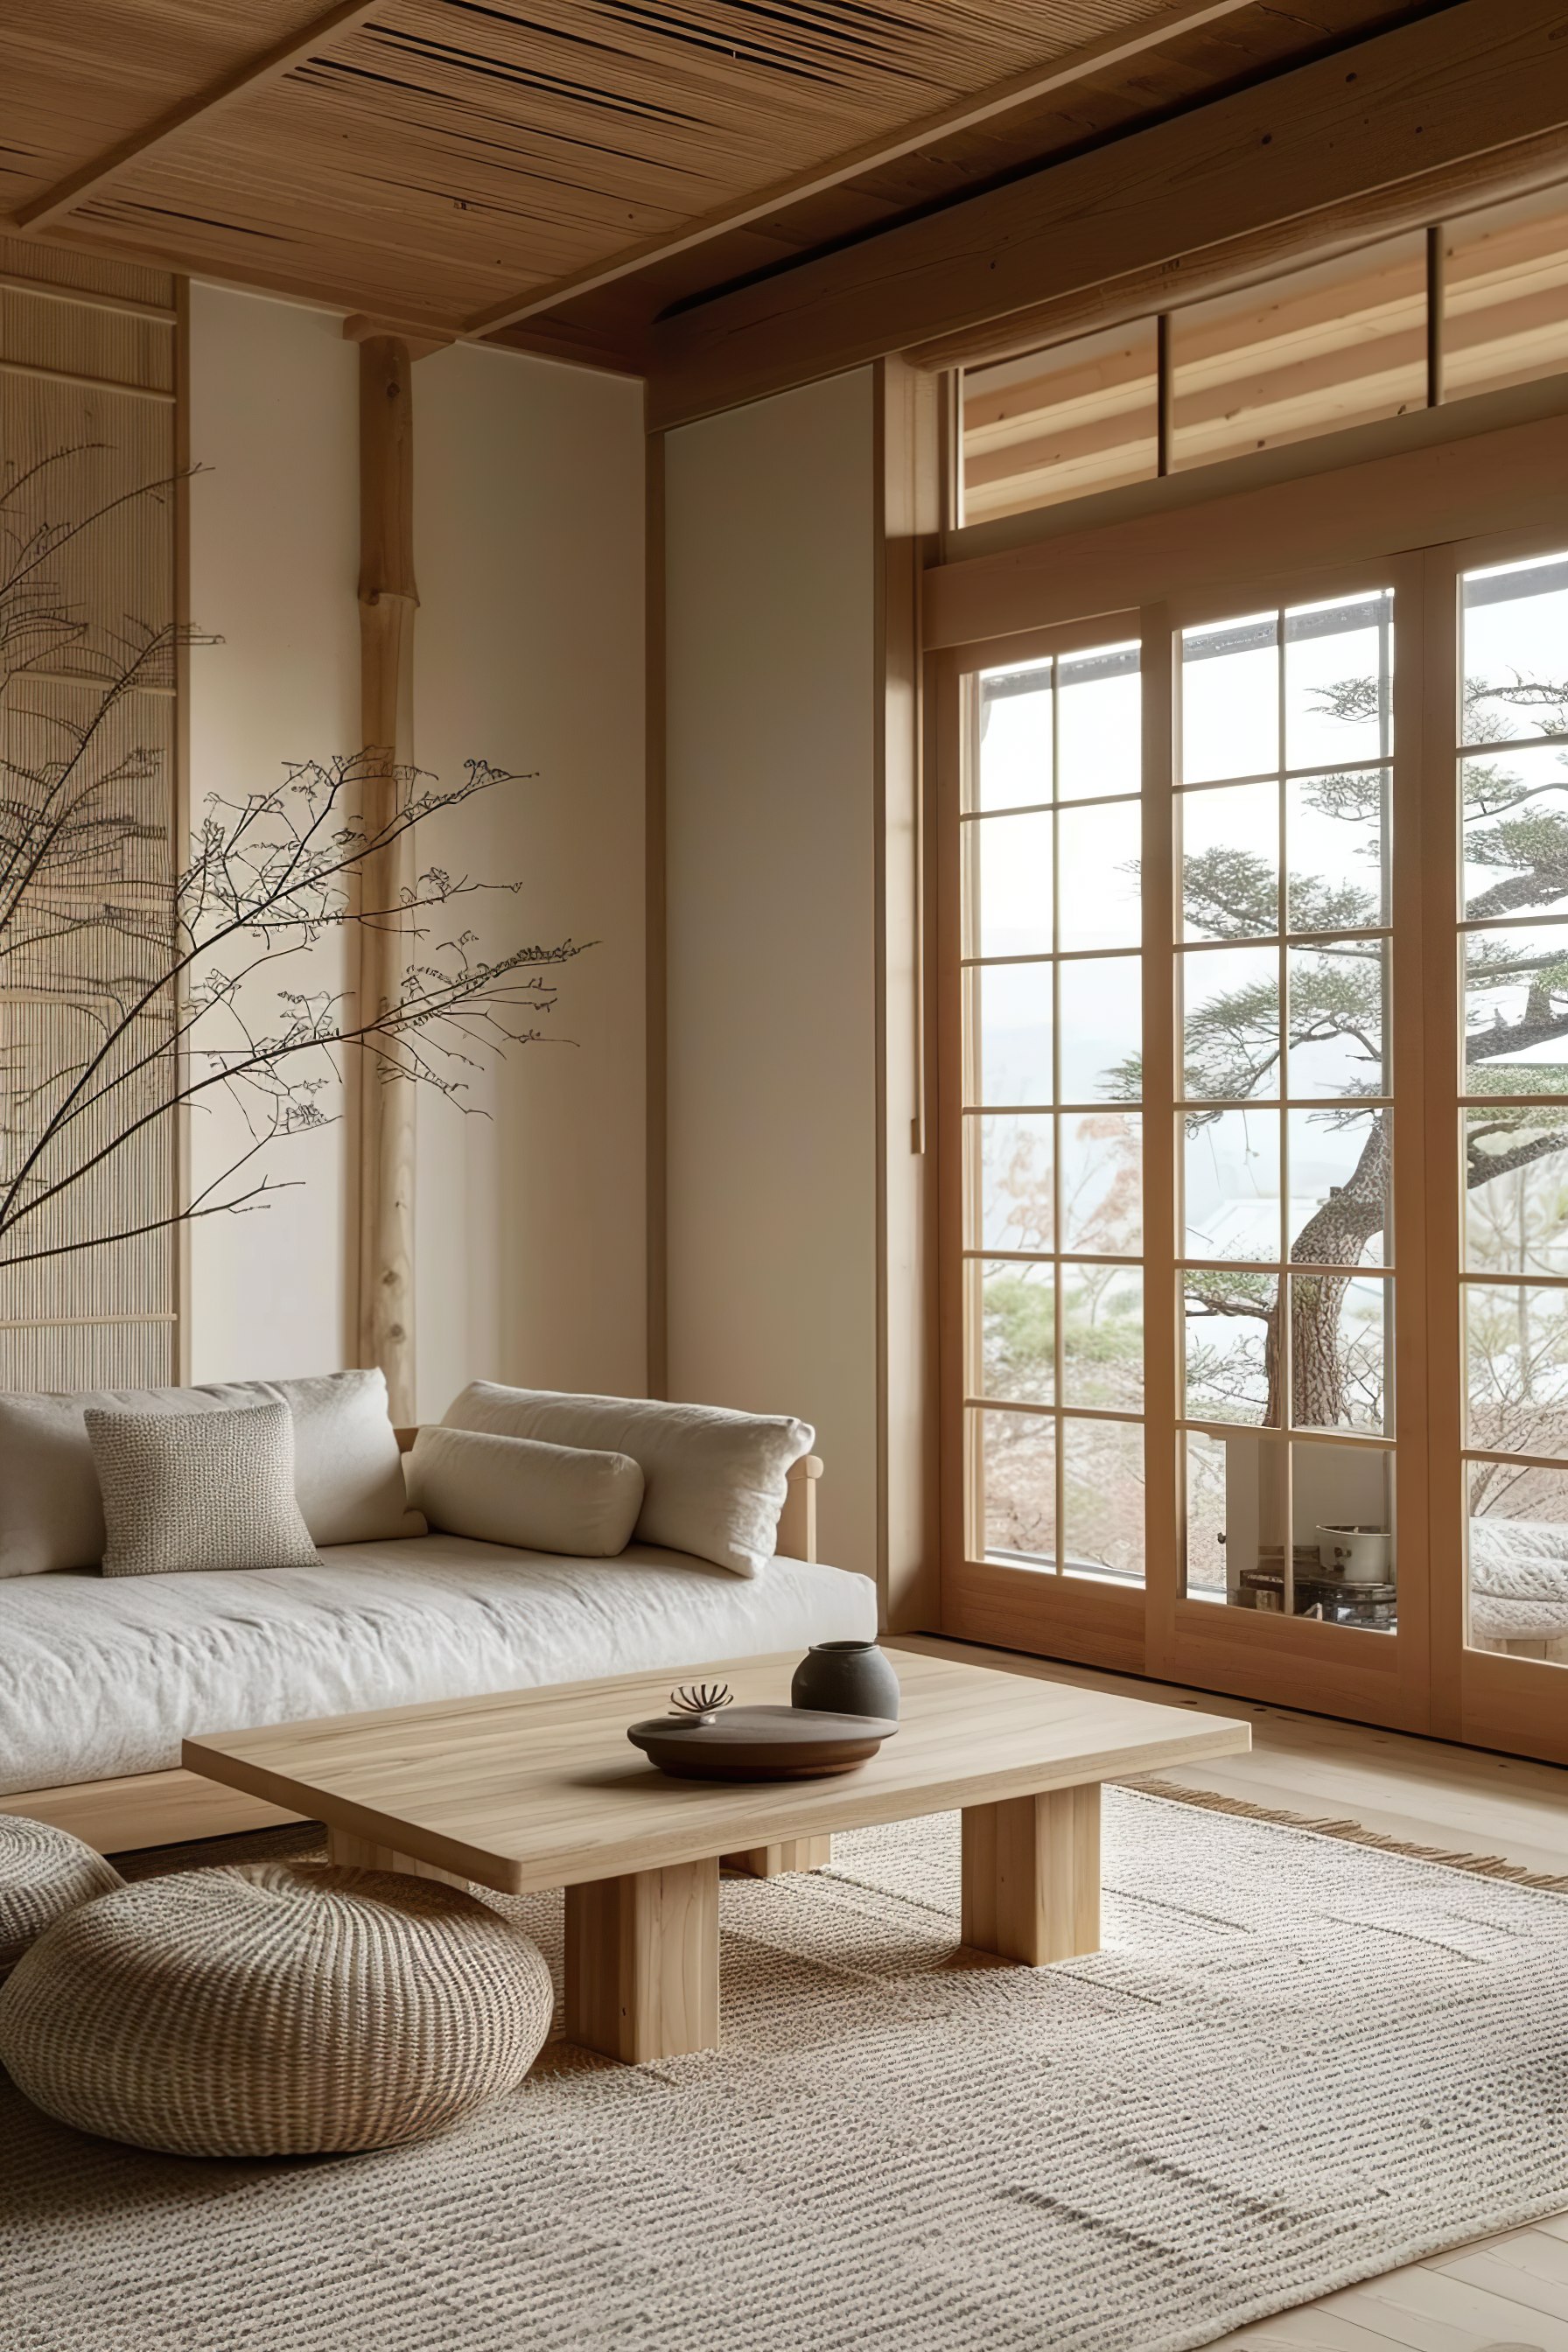 A serene room with a traditional Japanese aesthetic featuring wooden furniture, tatami mat flooring, and a view of trees through tall windows.